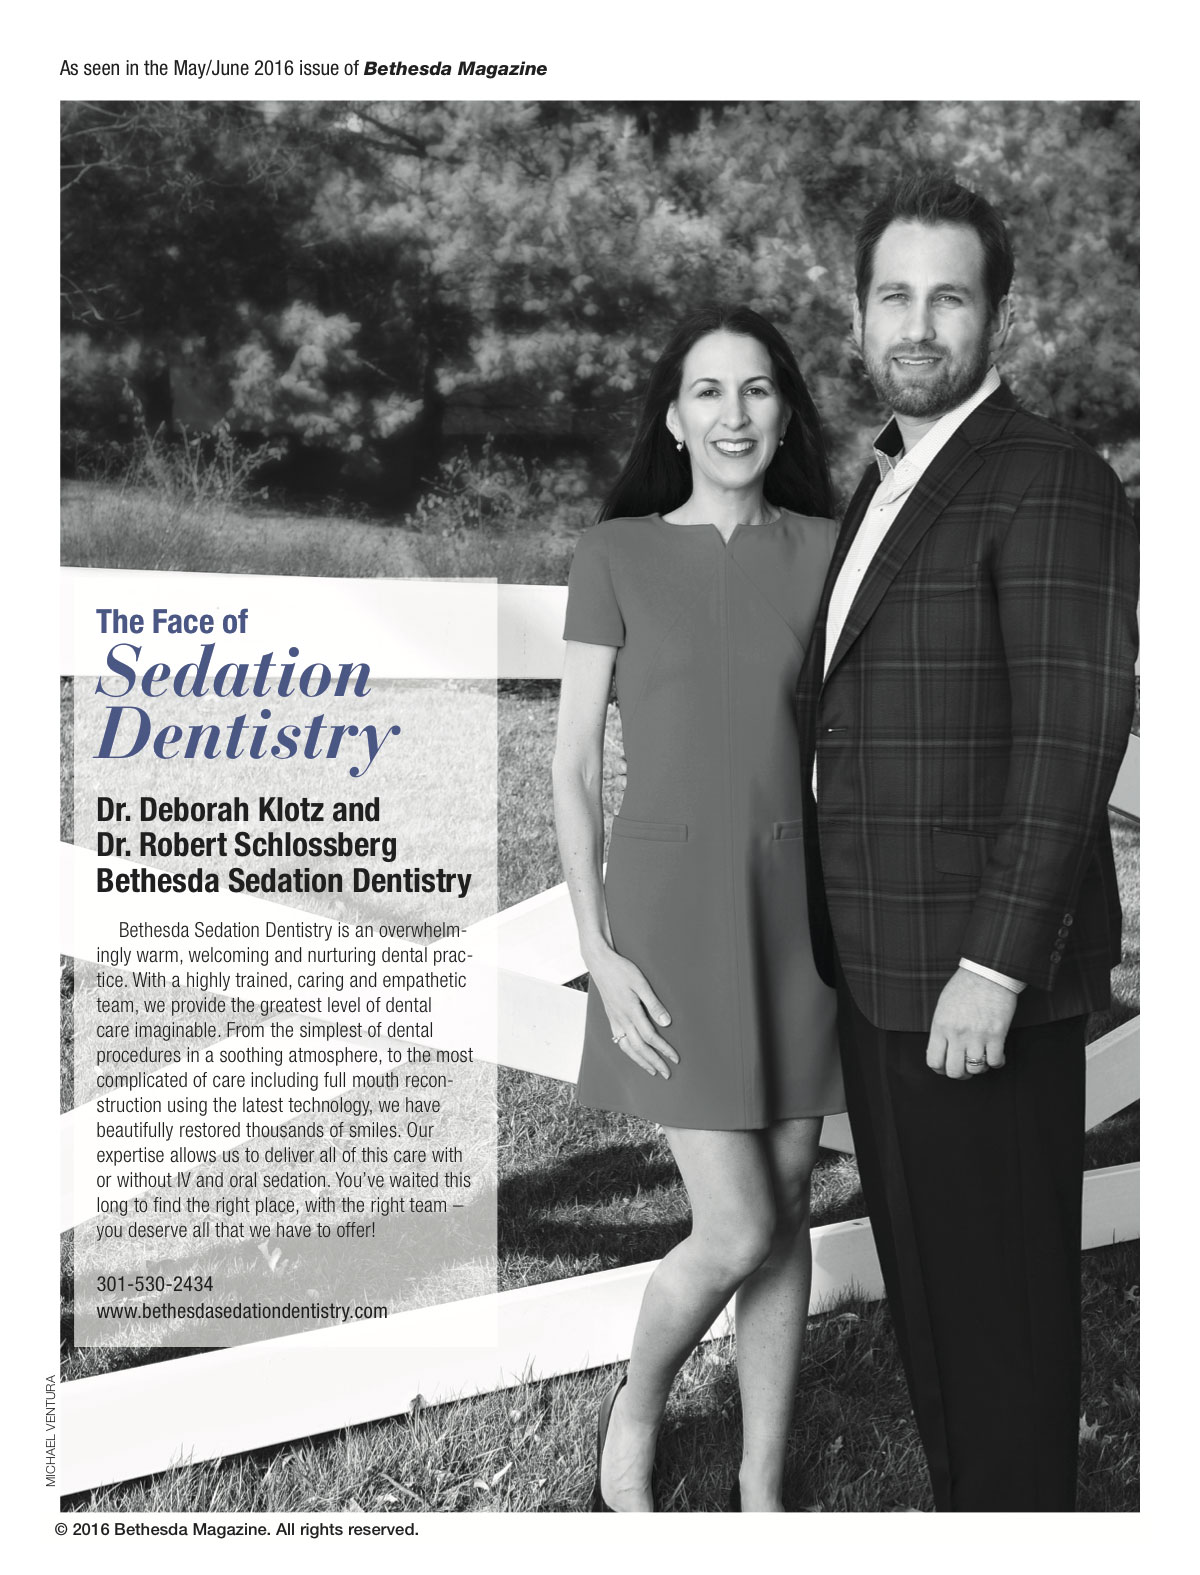 Interview with Robert Schlossberg and Deborah Klotz, DDS for May/June 2016 issue of Bethesda Magazine